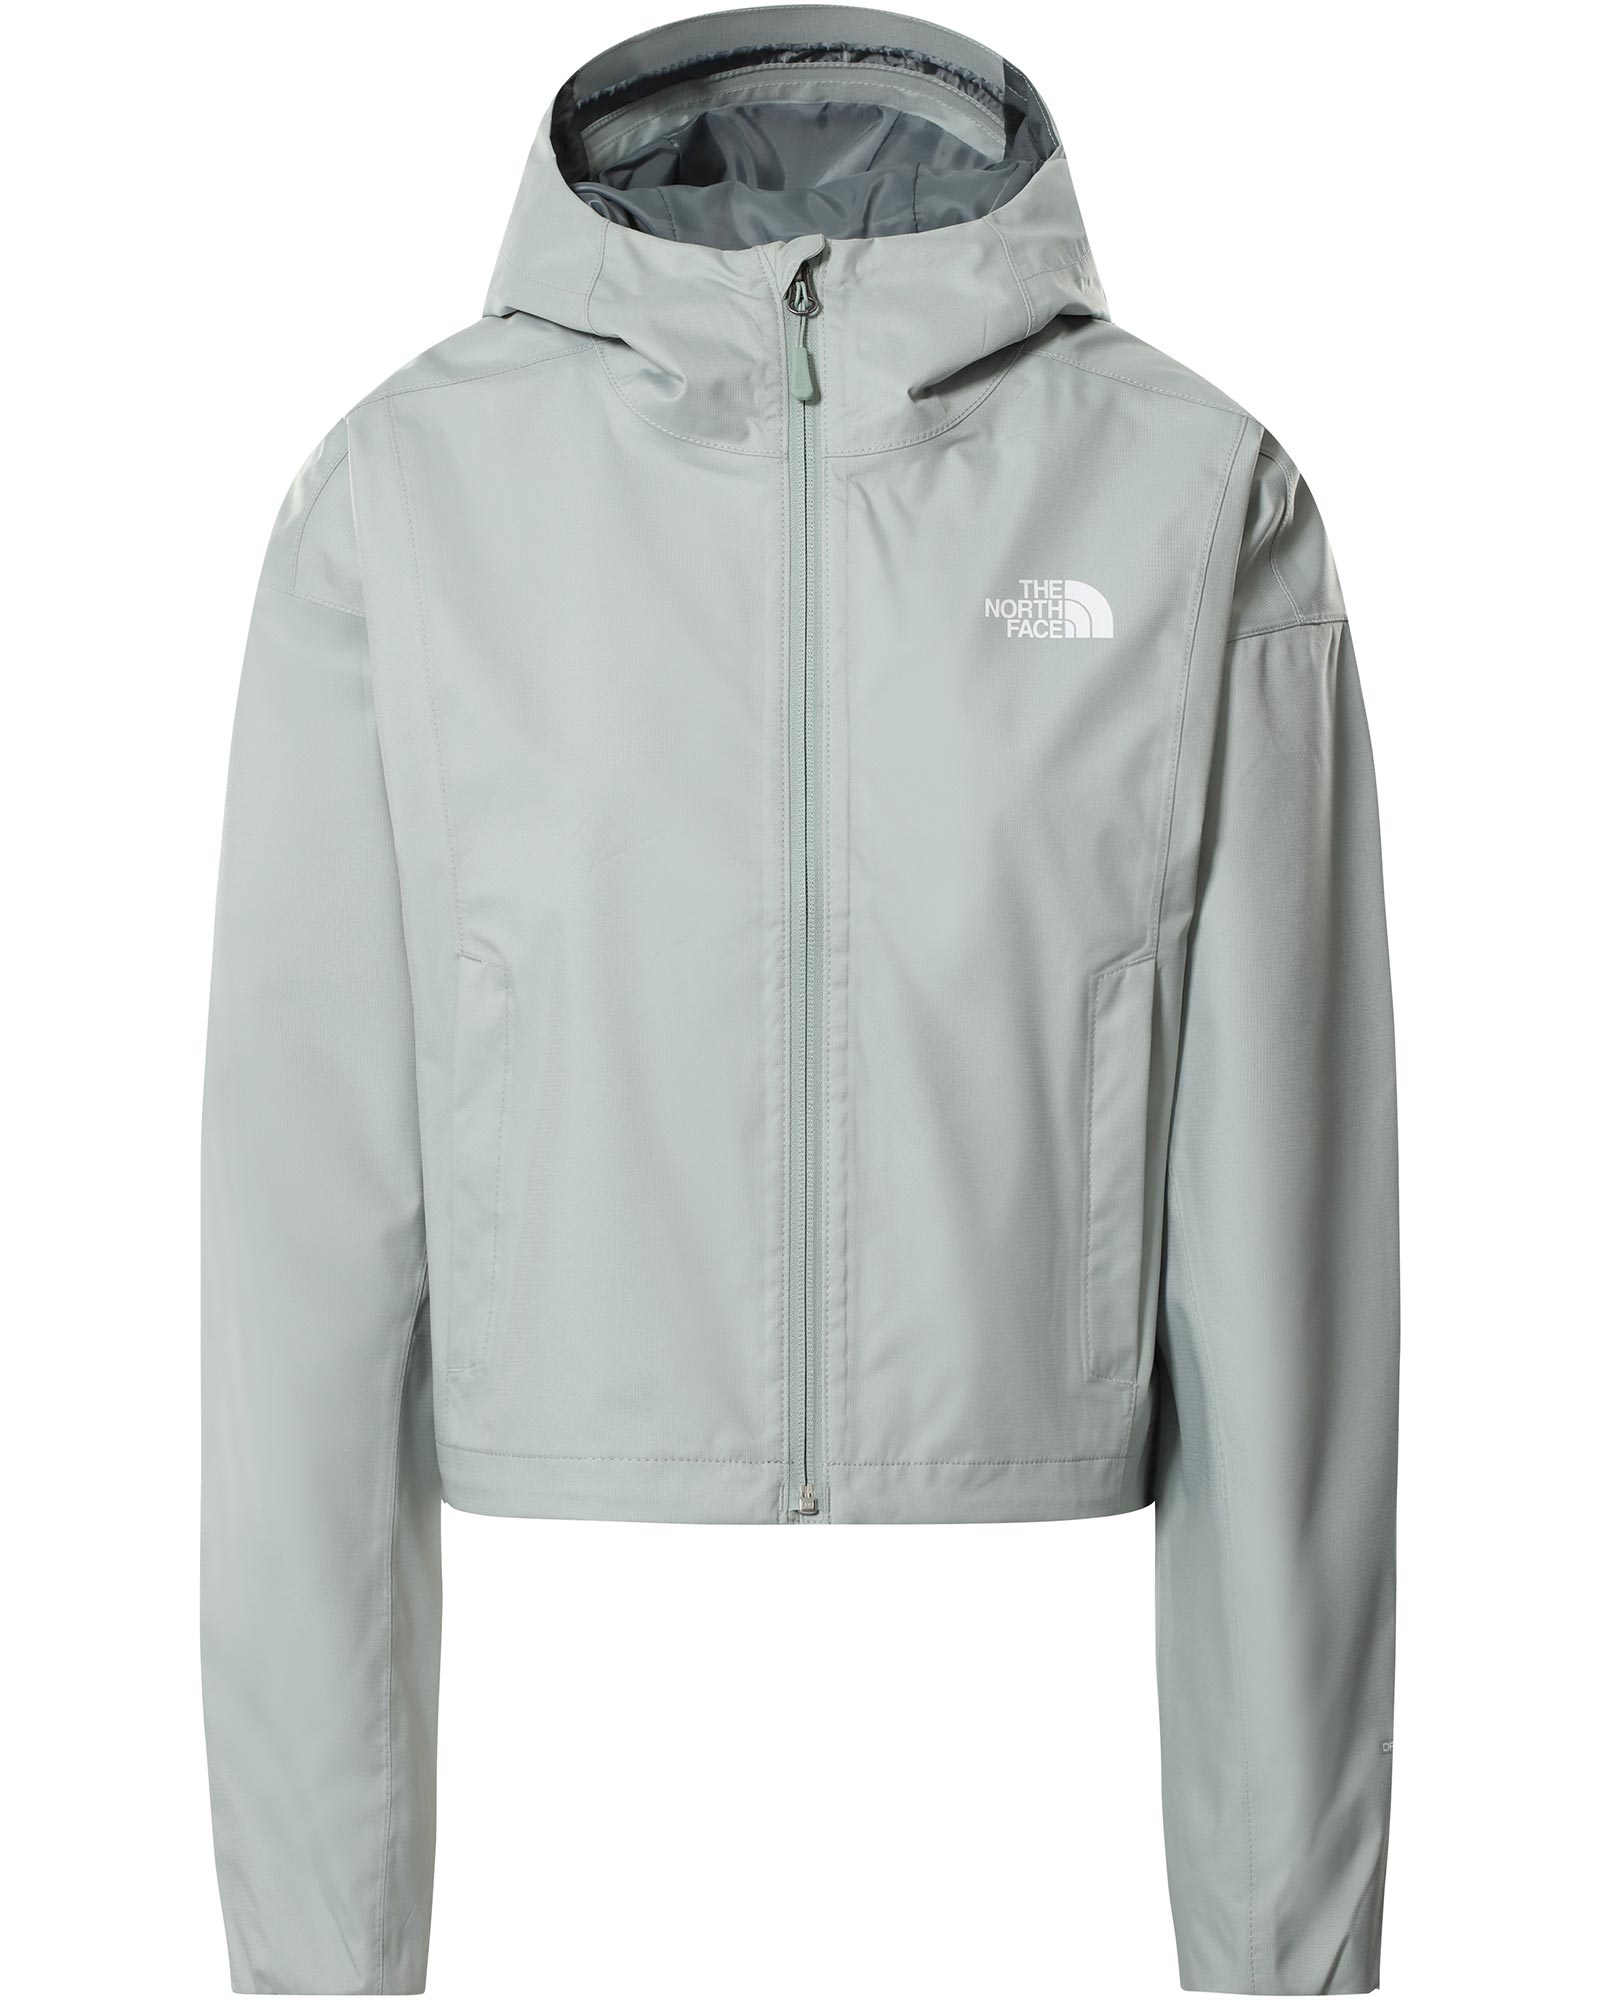 The North Face Cropped Quest Womens Jacket